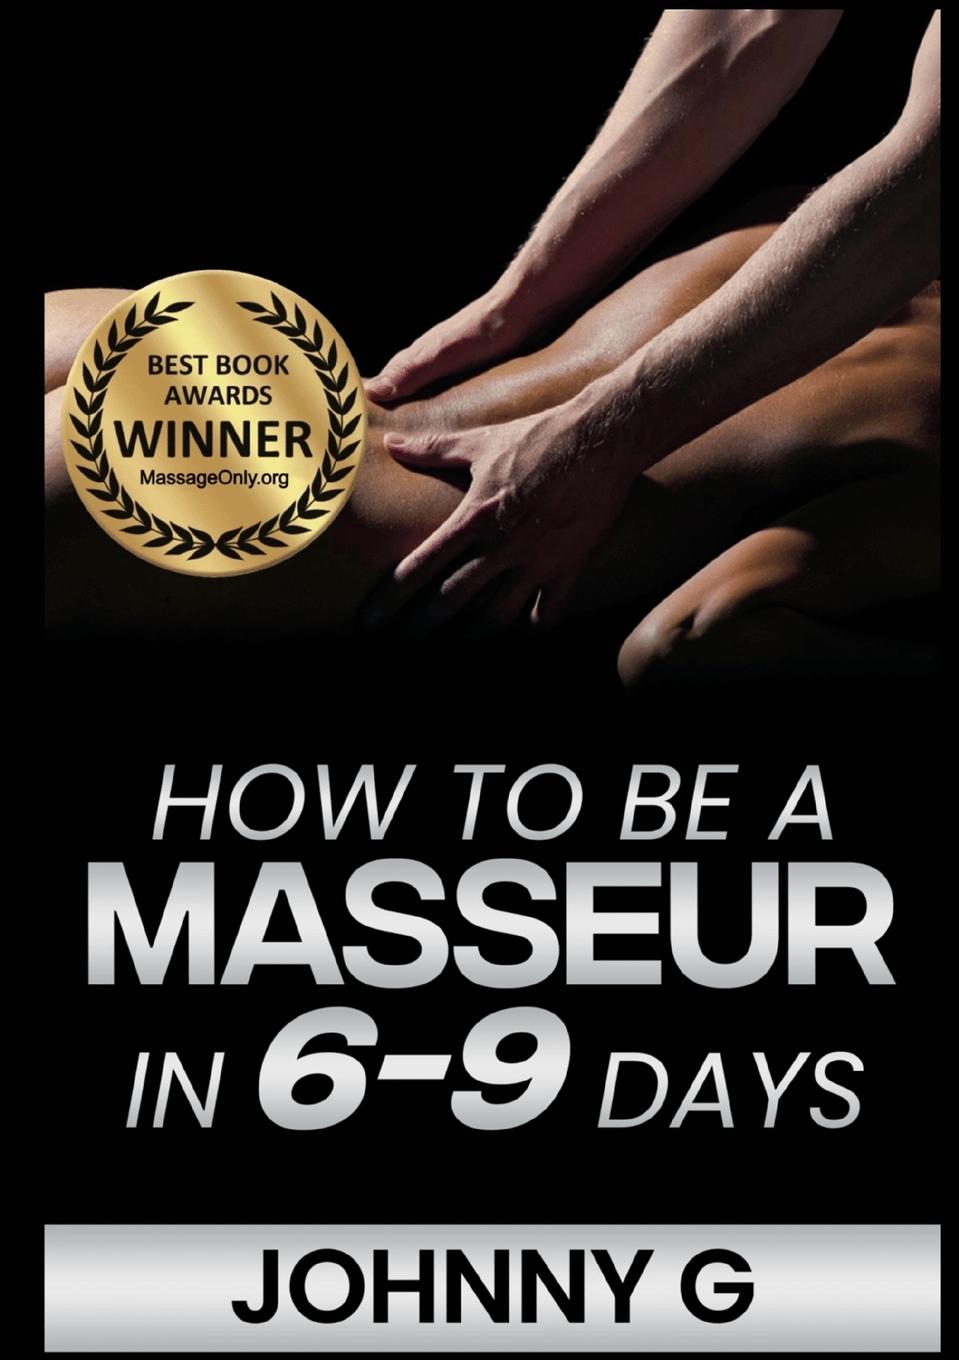 Book How To Be A Masseur In 6-9 Days 